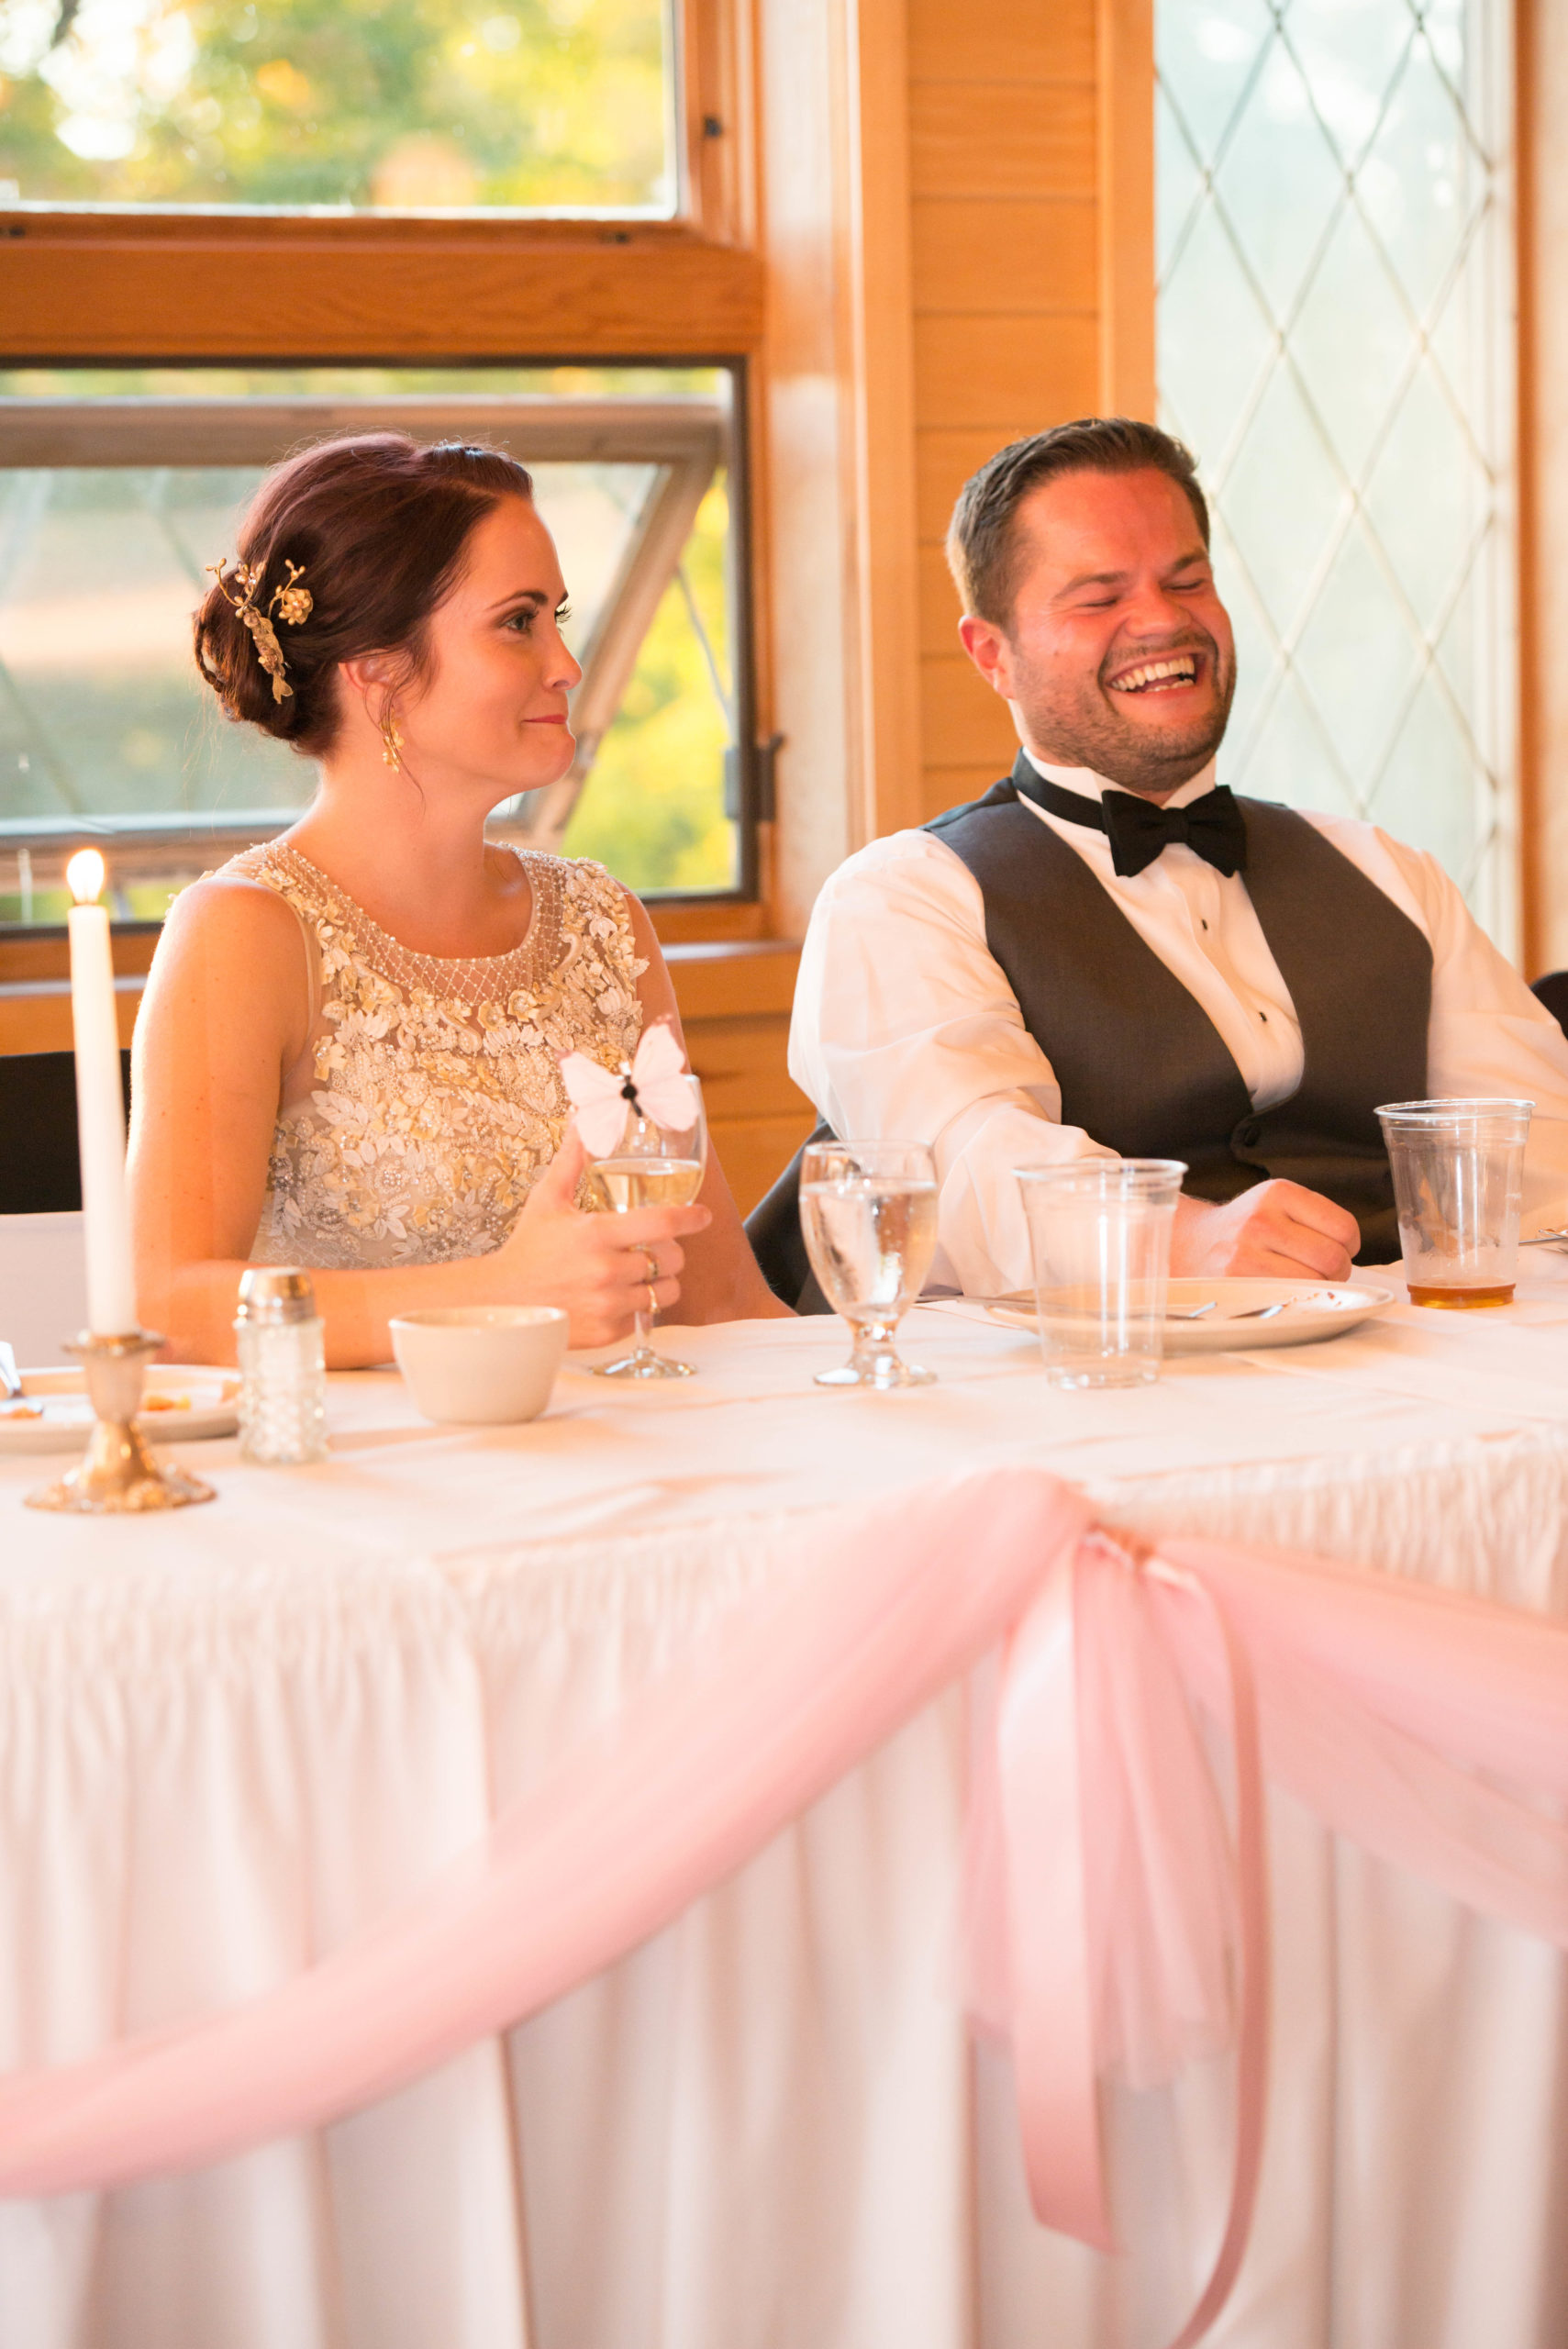 Bride and groom laughing at wedding table